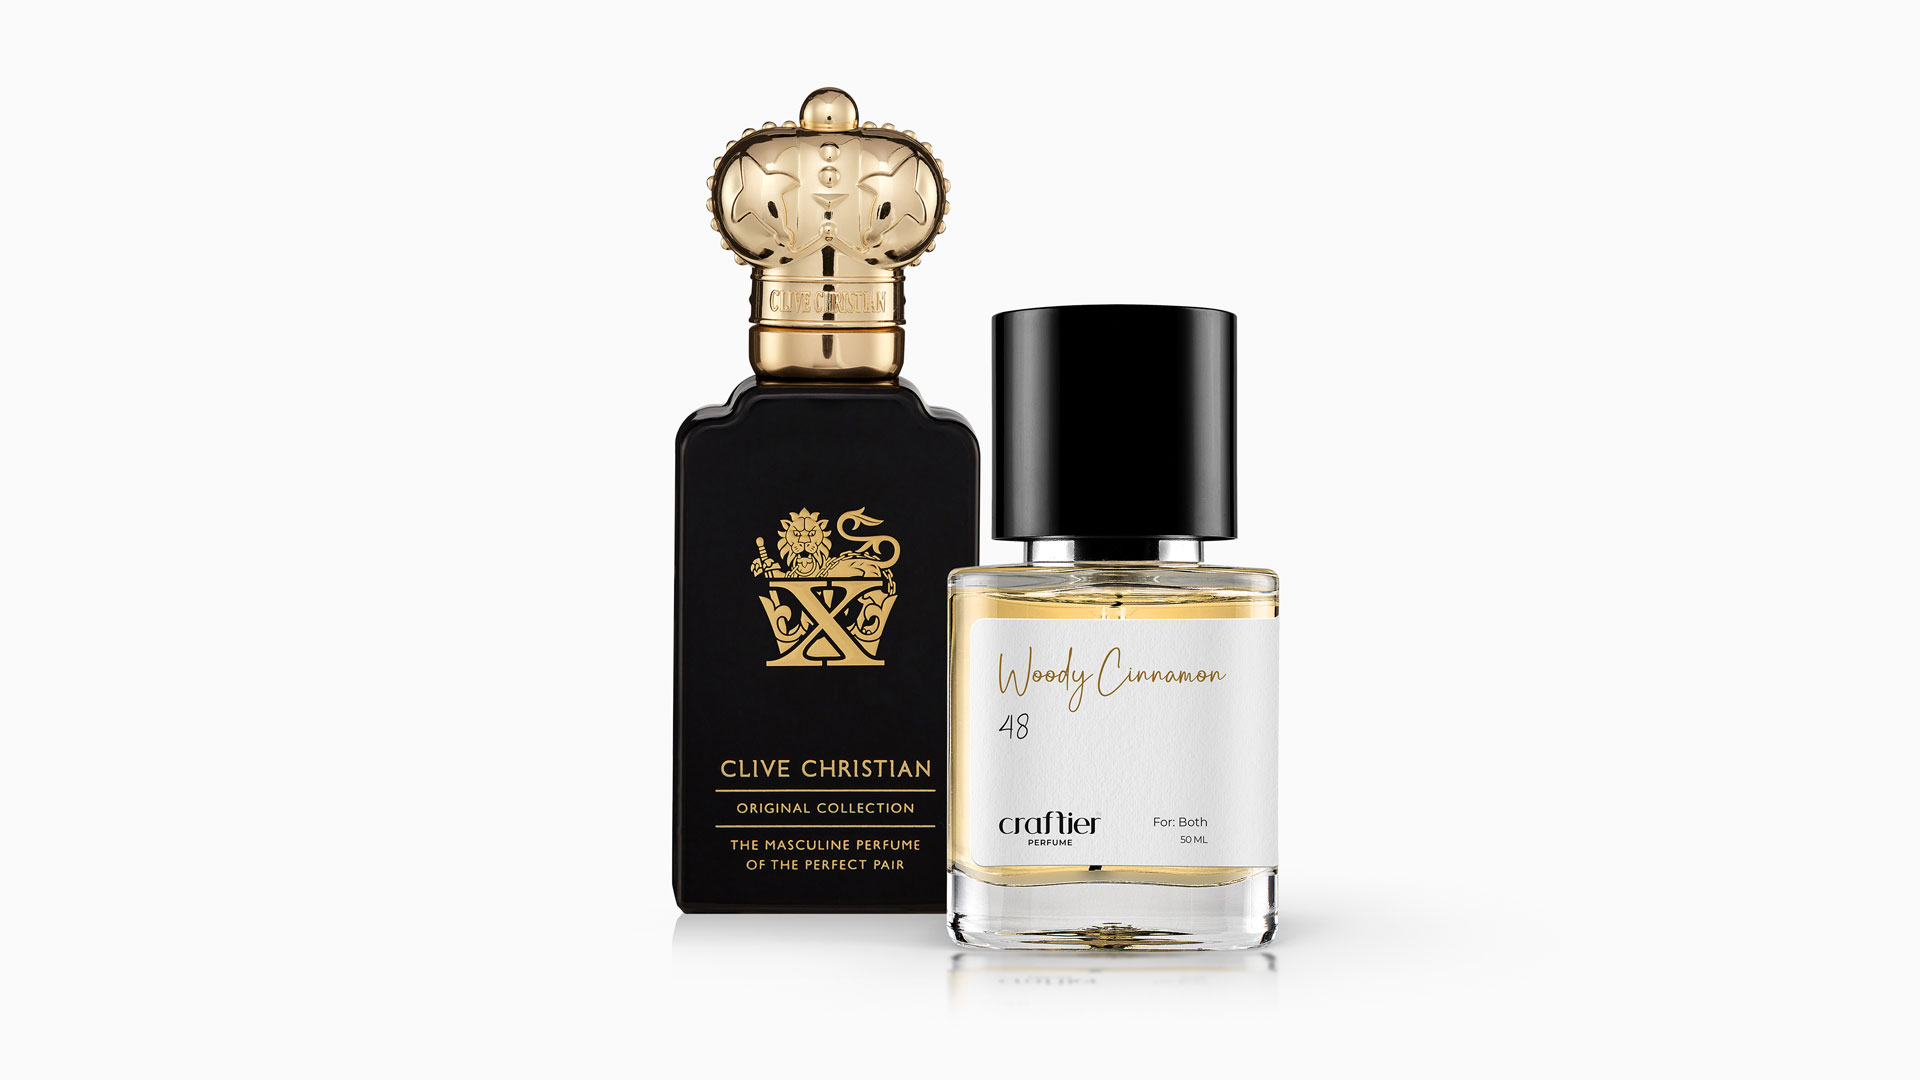 What Sets Clive Christian Perfume Apart from Other Fragrances?